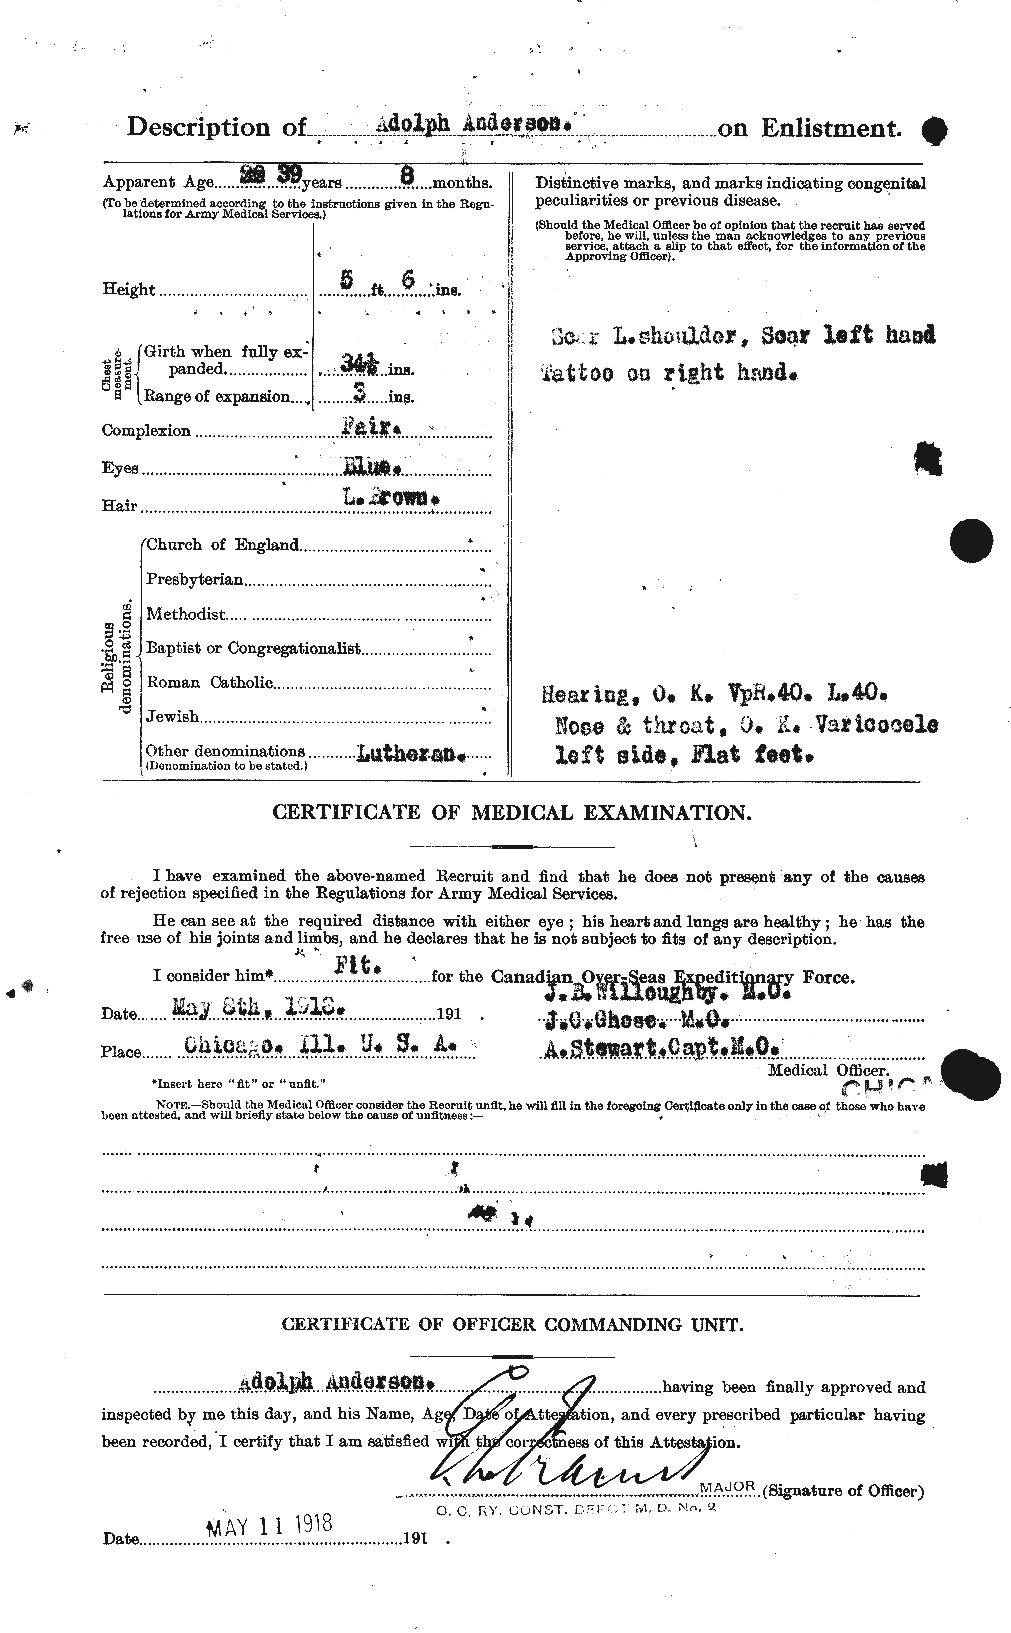 Personnel Records of the First World War - CEF 209574b